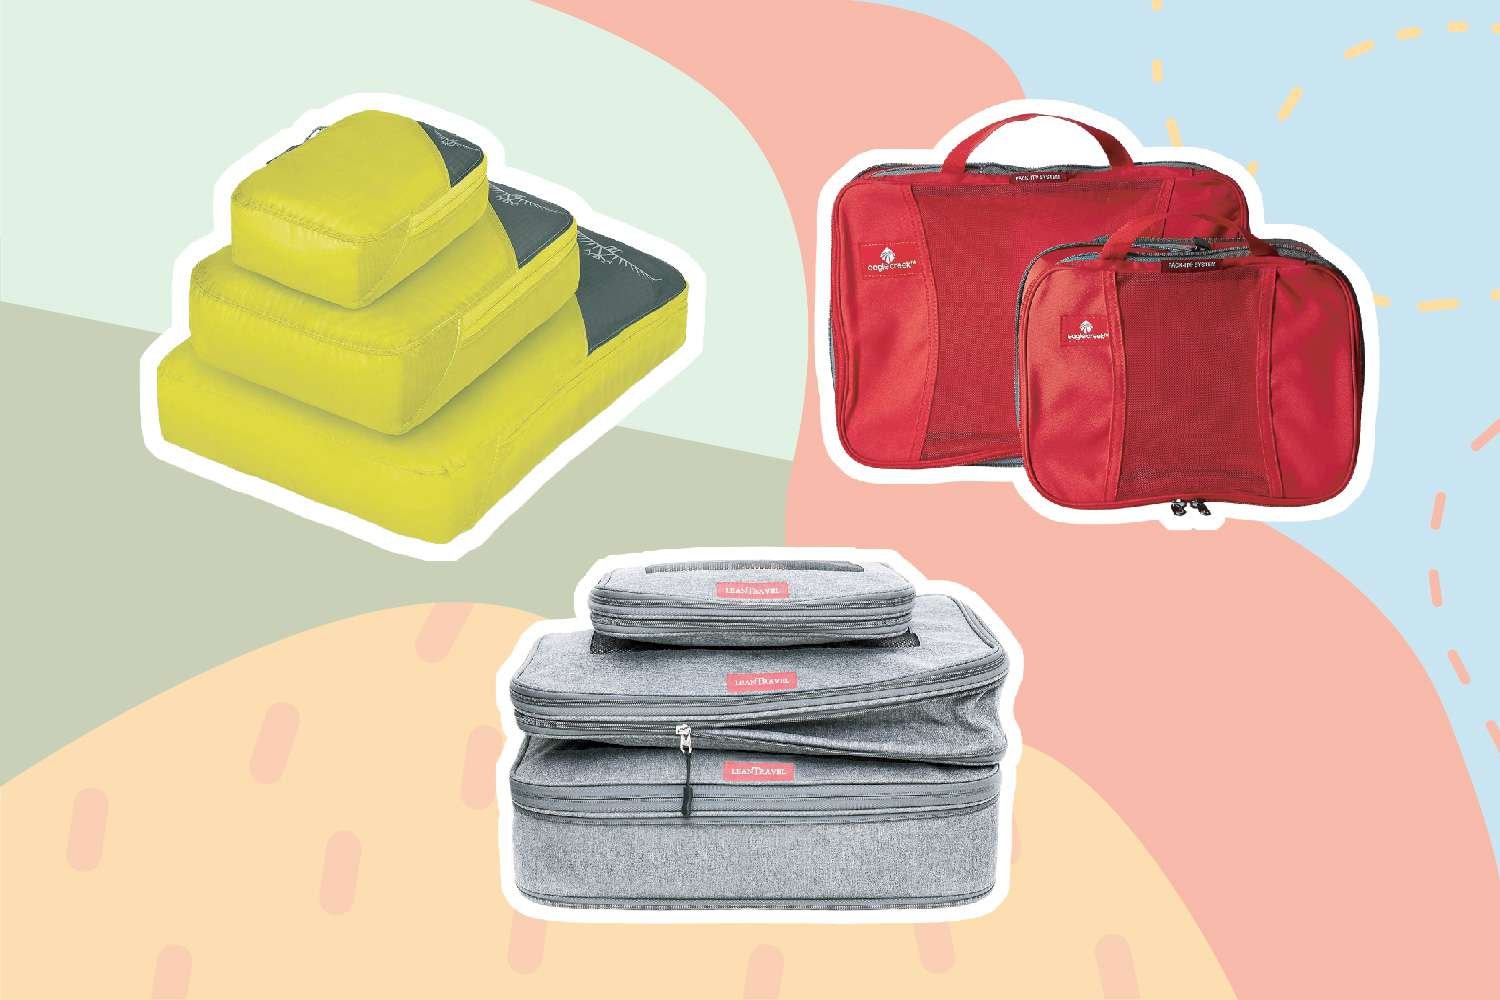 The 10 Best Packing Cubes of 2022, According to Our Tests